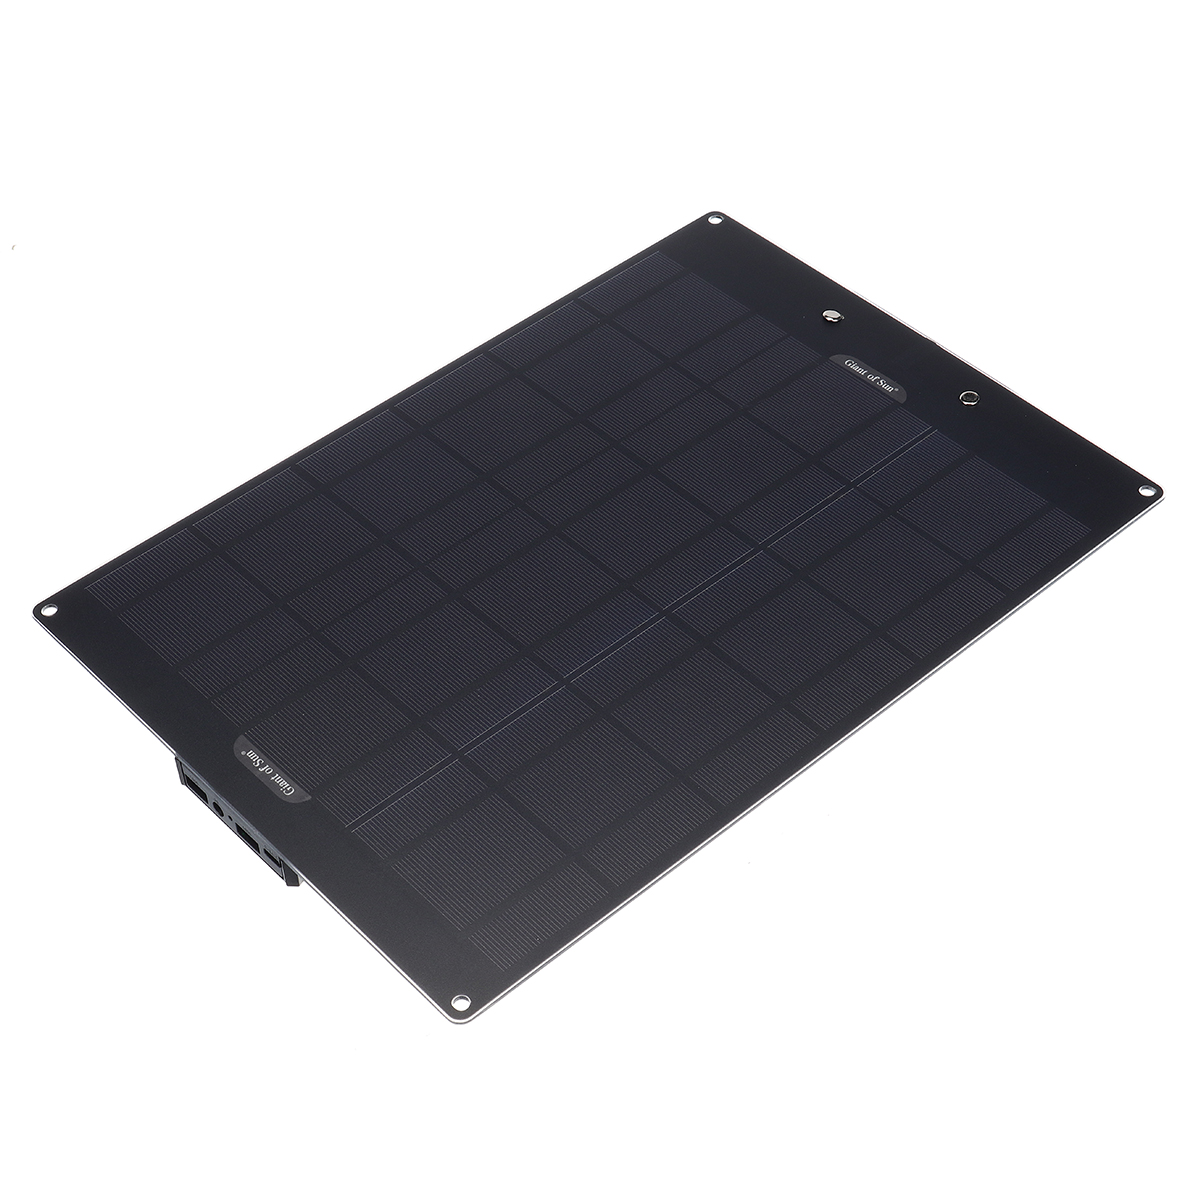 Monocrystalline-Solar-Panel-4-In-1-Output-Port-30W-Solar-Power-Panel-Charger-1885550-11